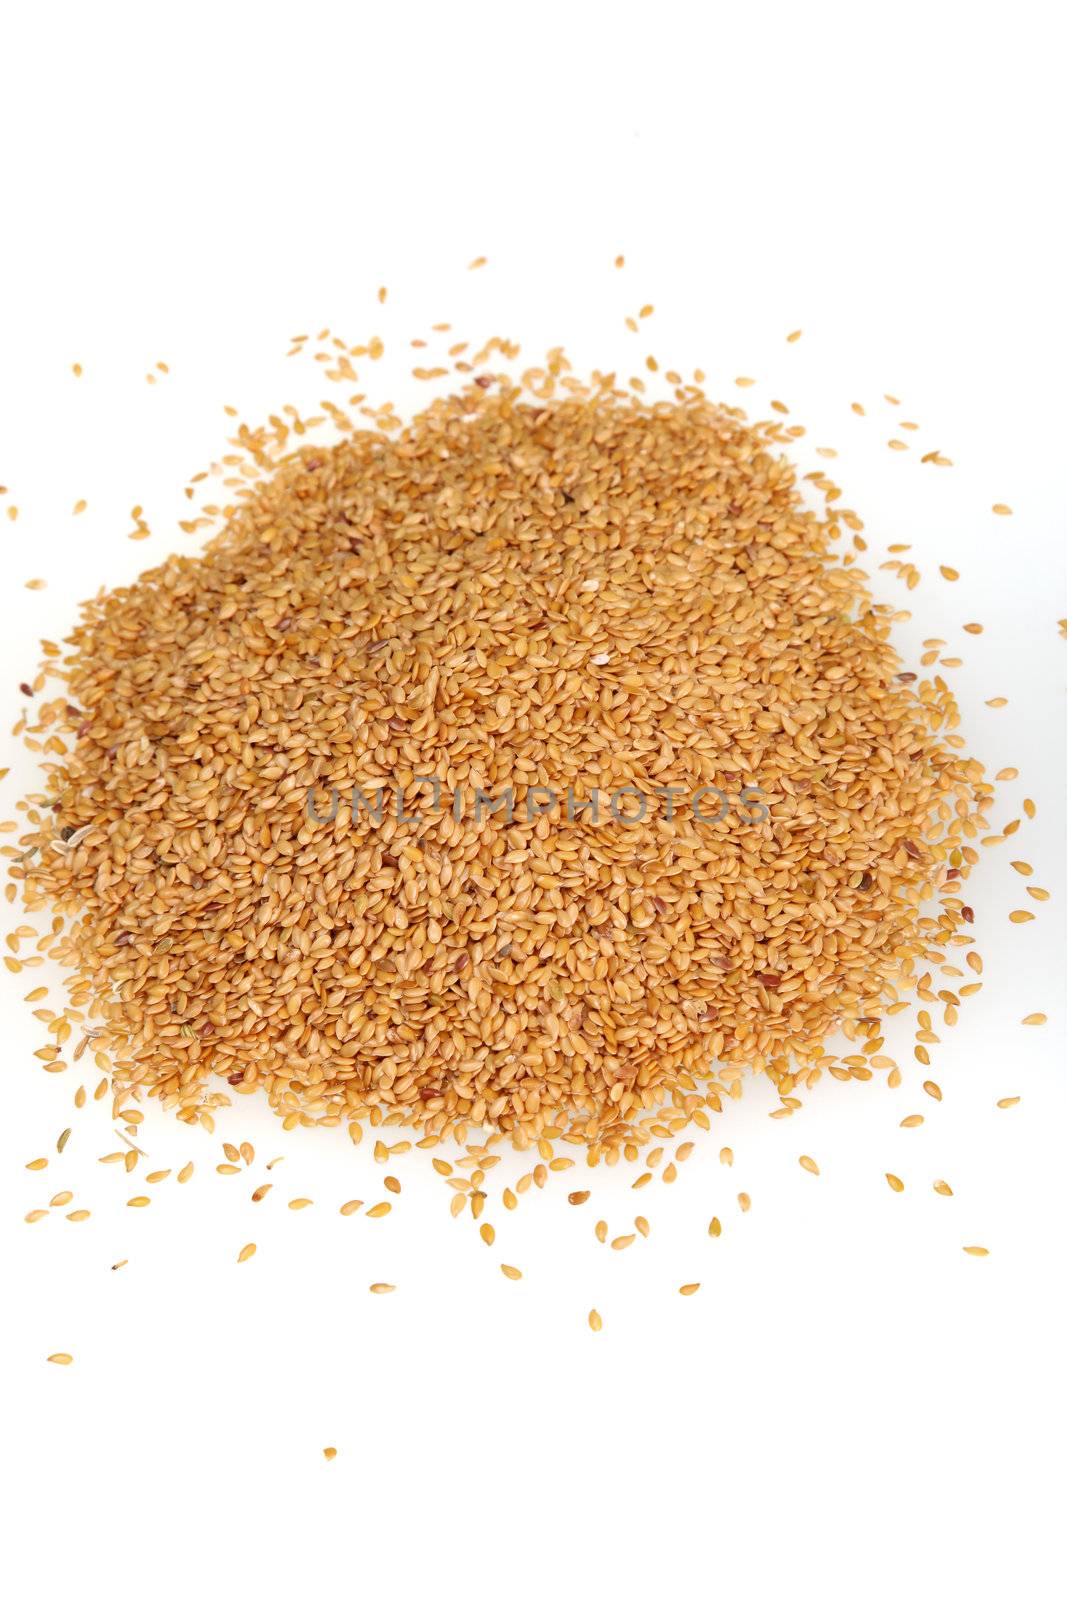 Linseed on white background Yellow food grains on white background by Farina6000